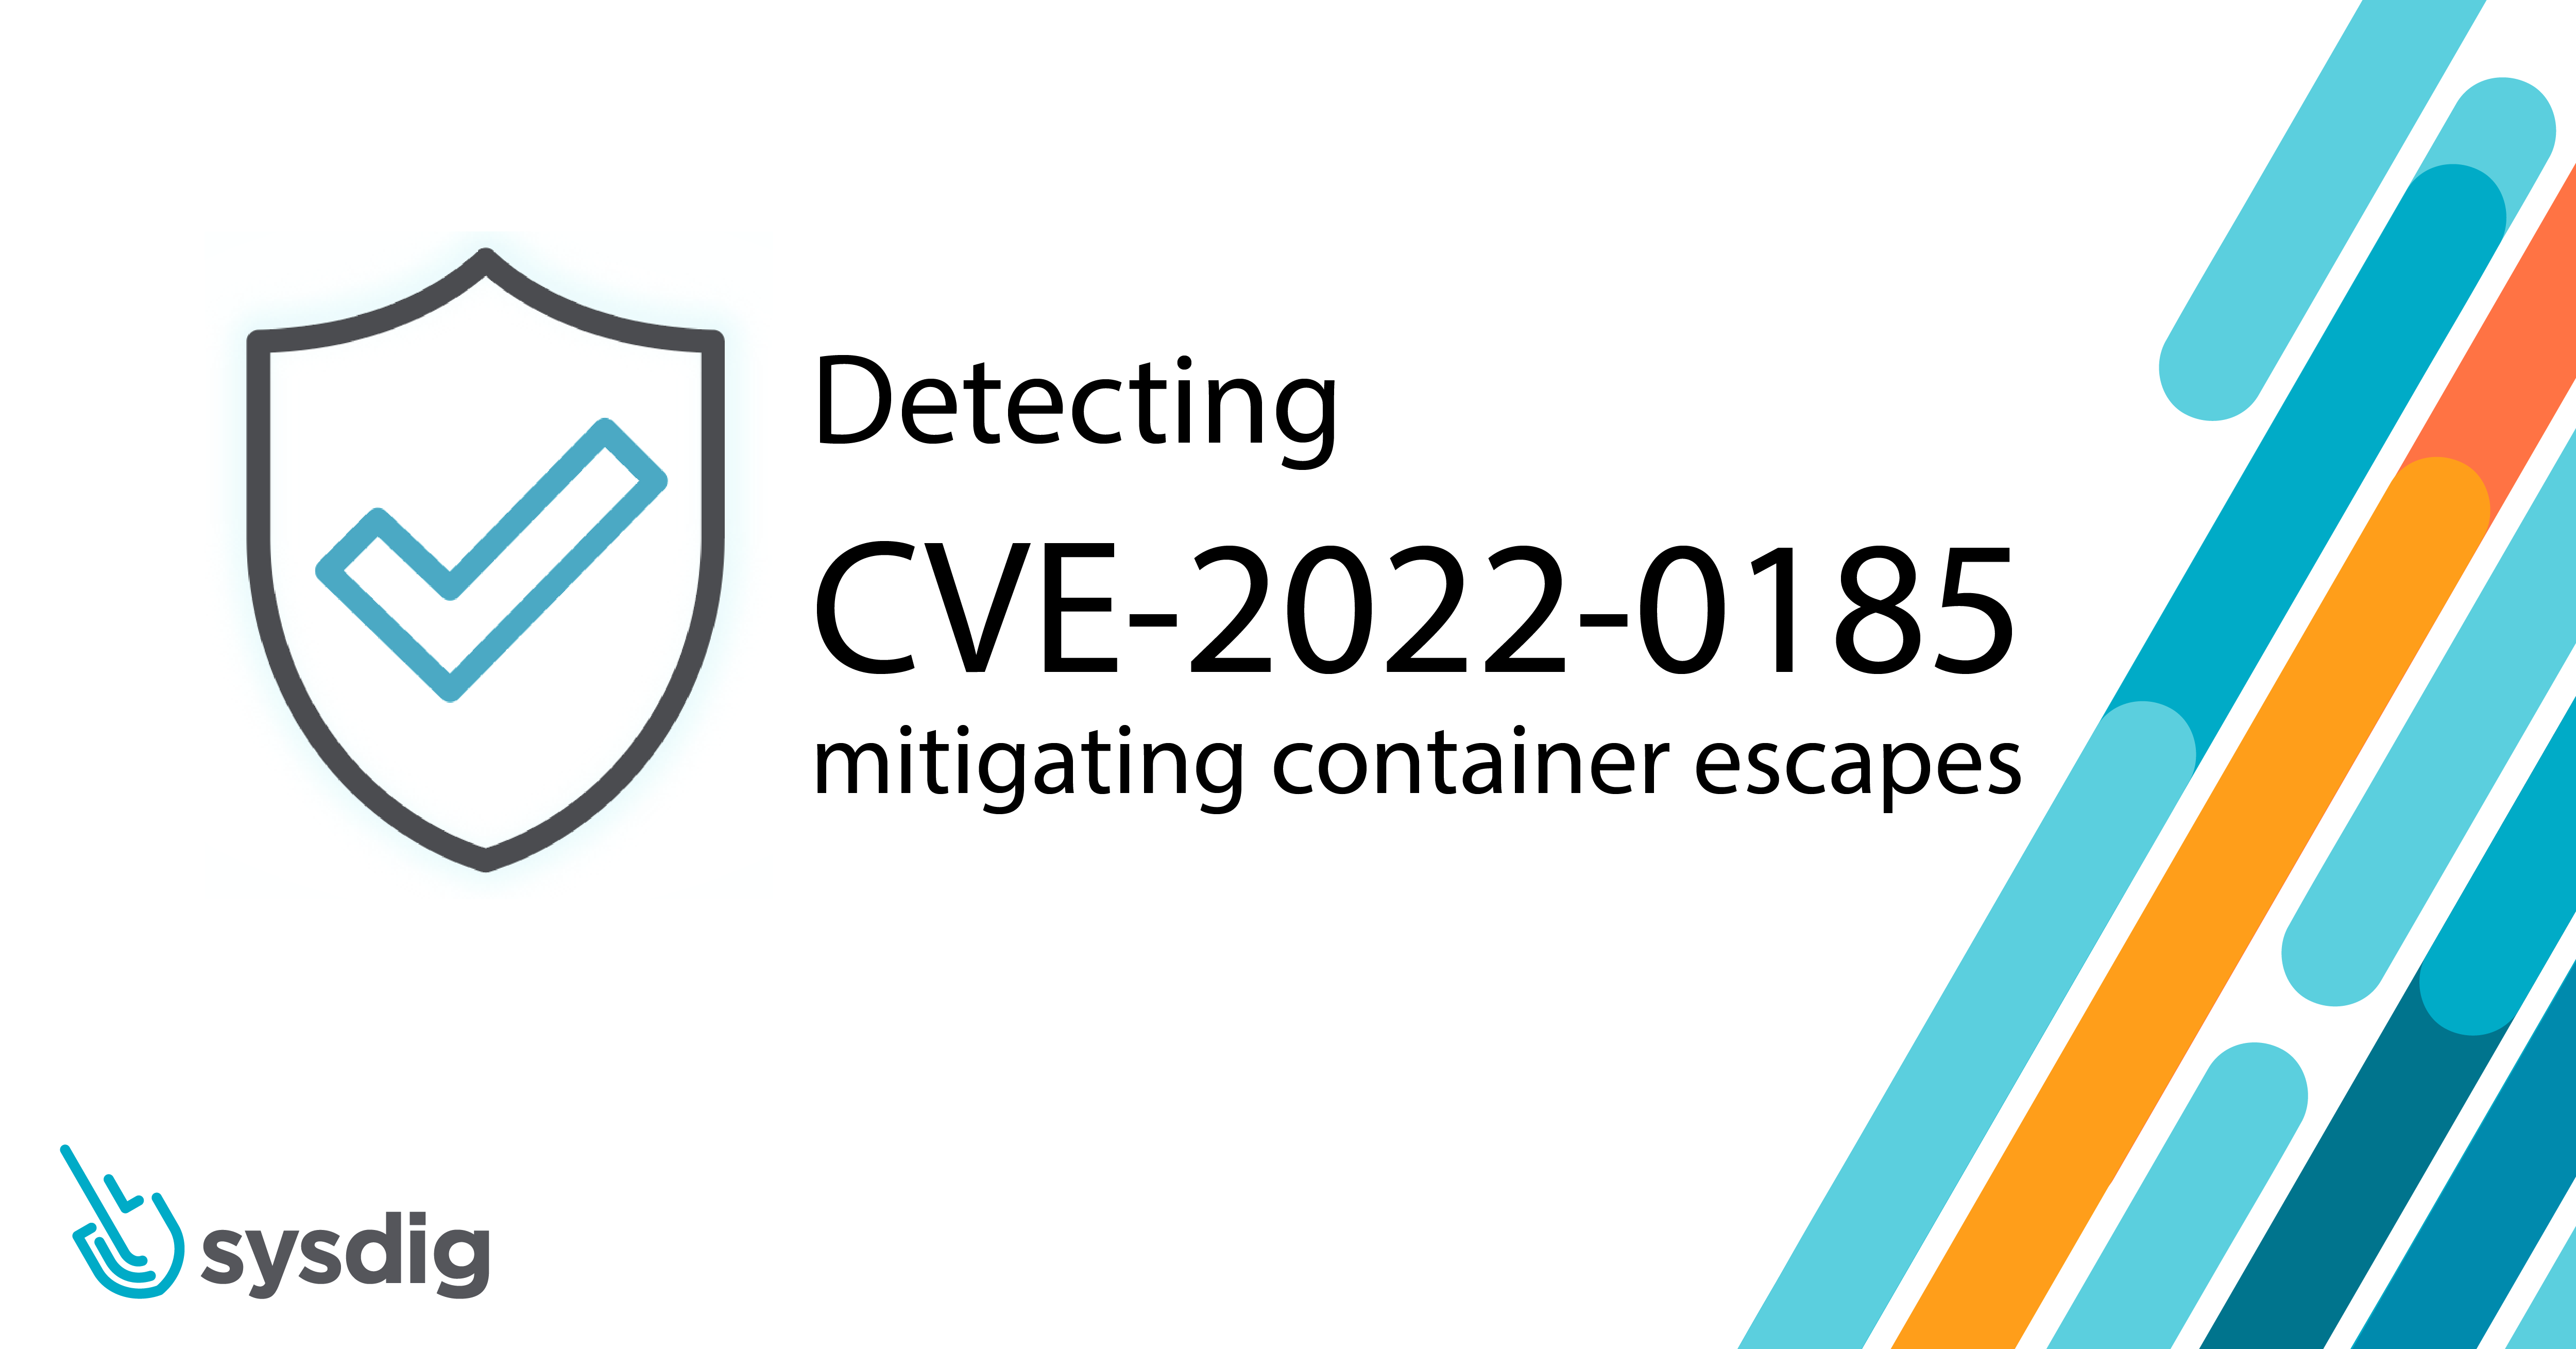 CVE-2022-0185: Detecting and mitigating Linux Kernel vulnerability causing container escape thumbnail image